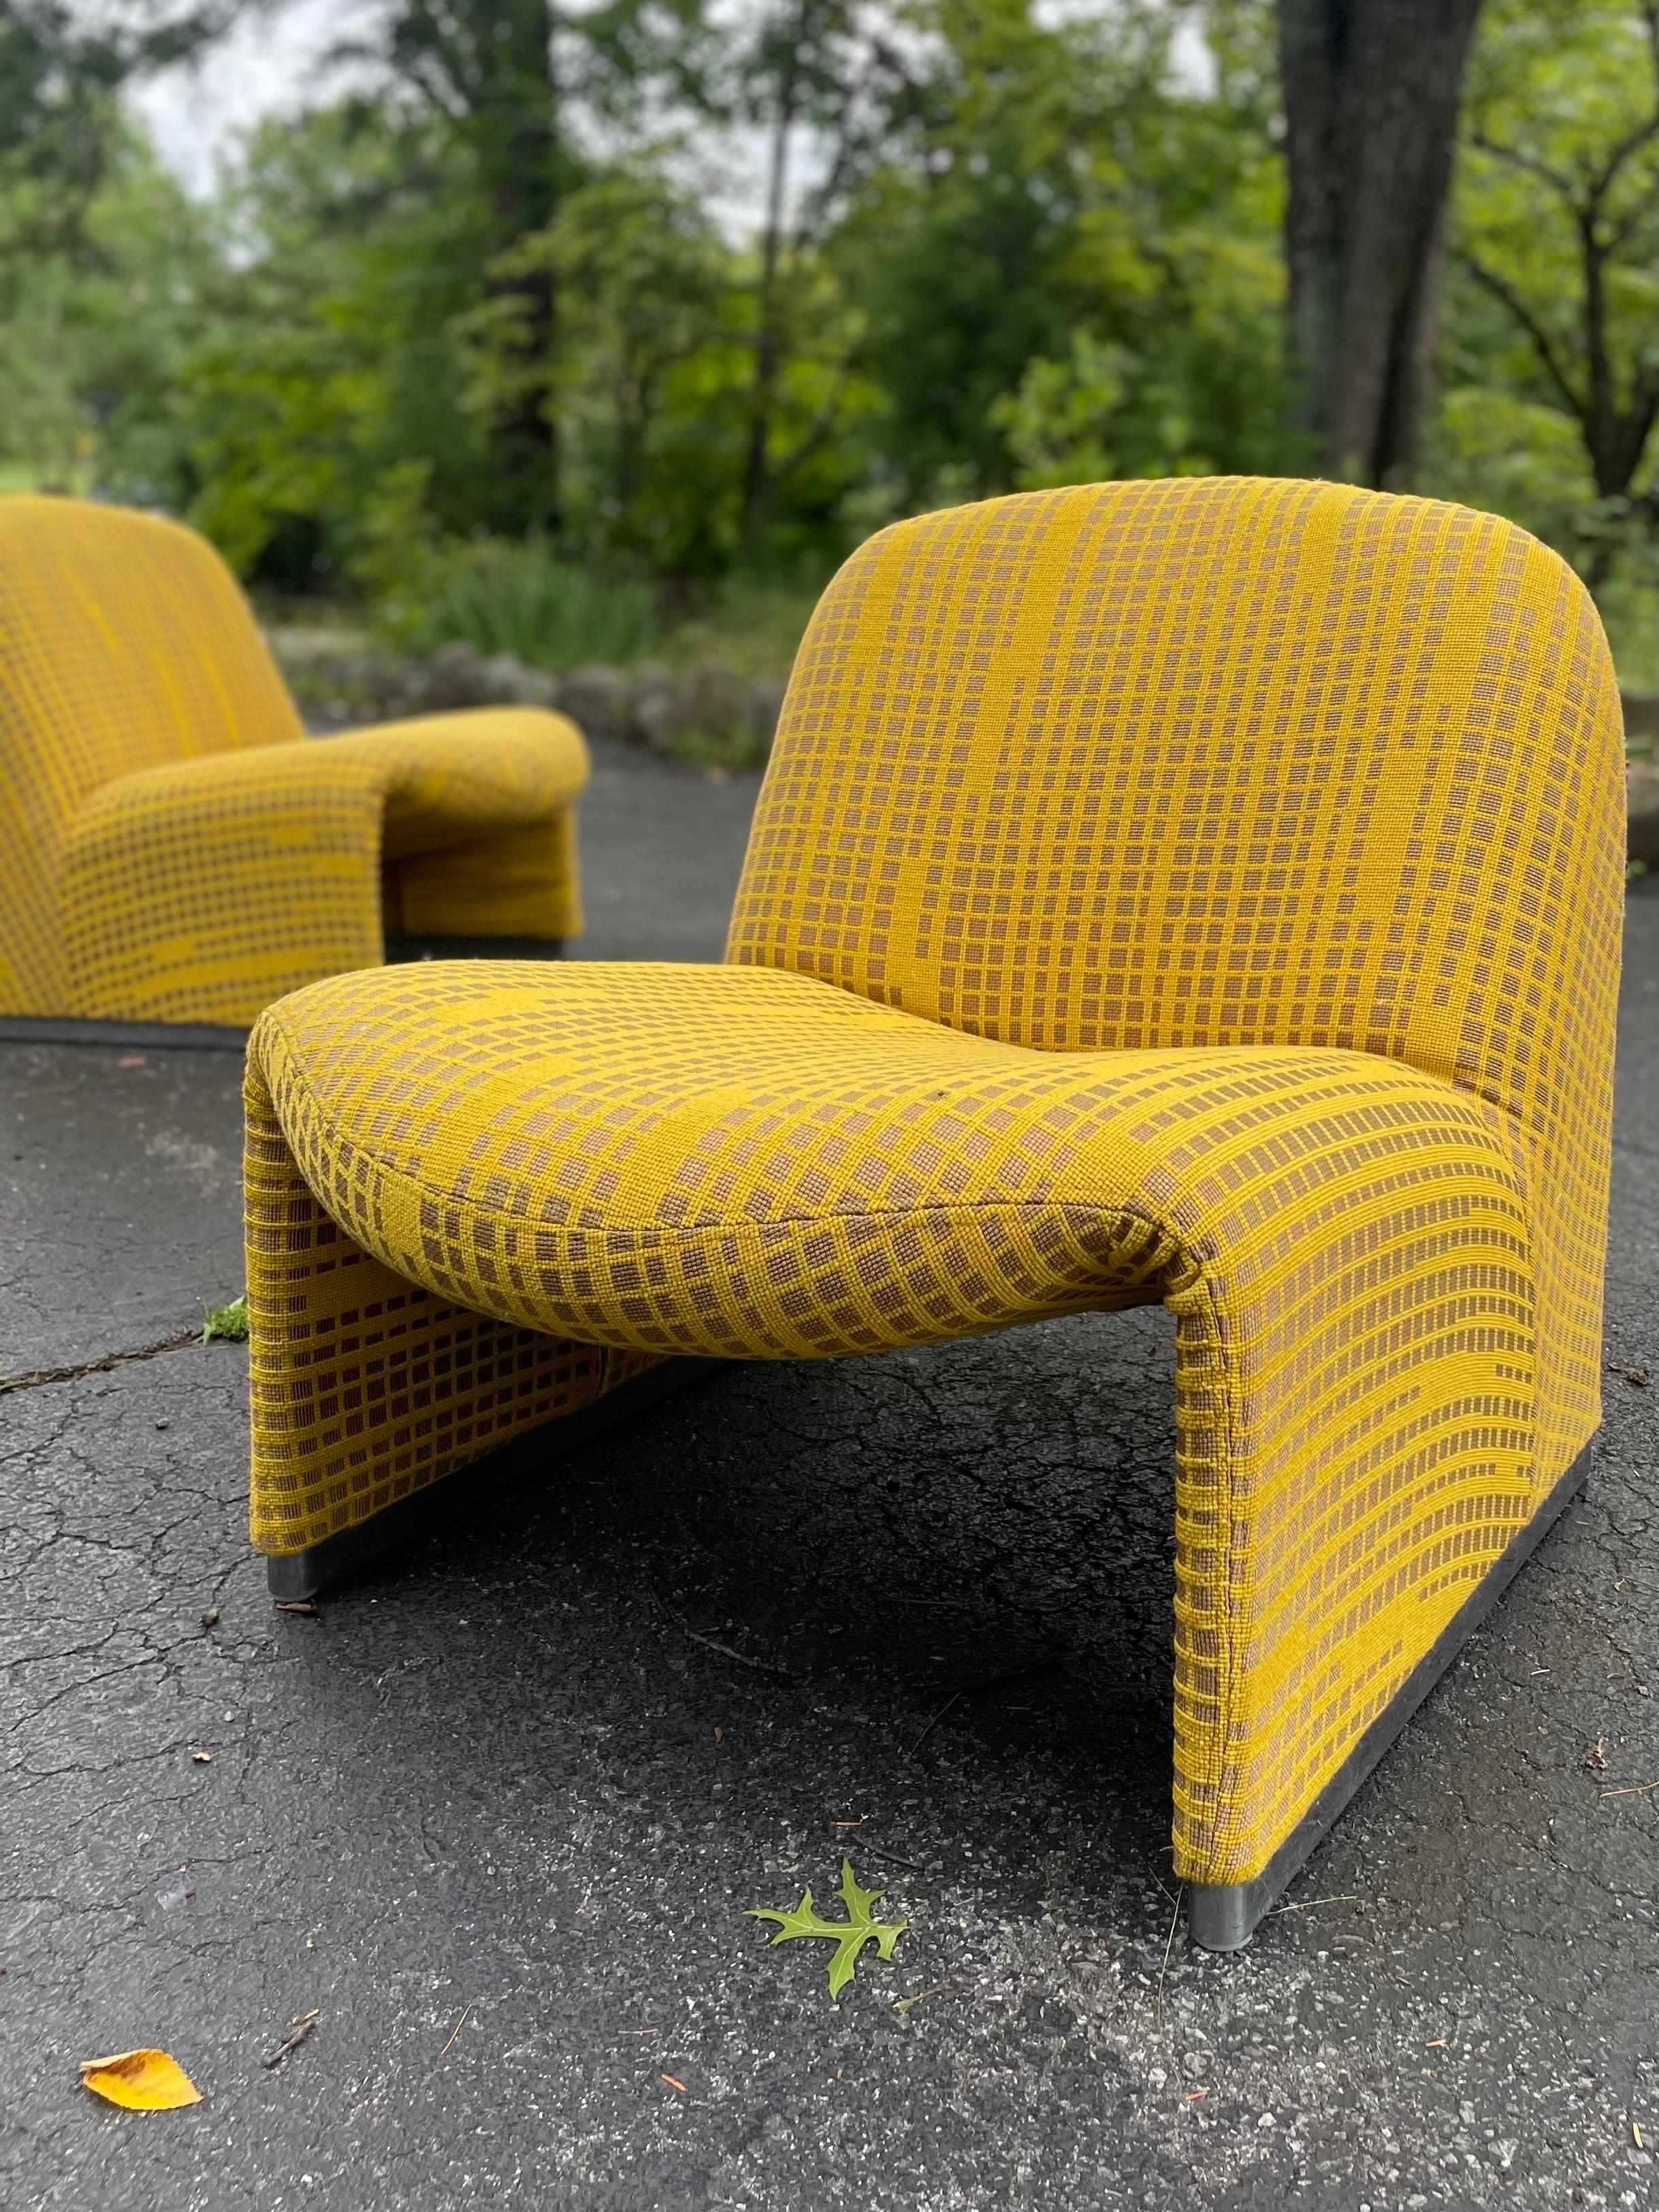 1970s Italian Modern Alky Chairs Alky by Giancarlo Piretti, a Pair For Sale 1